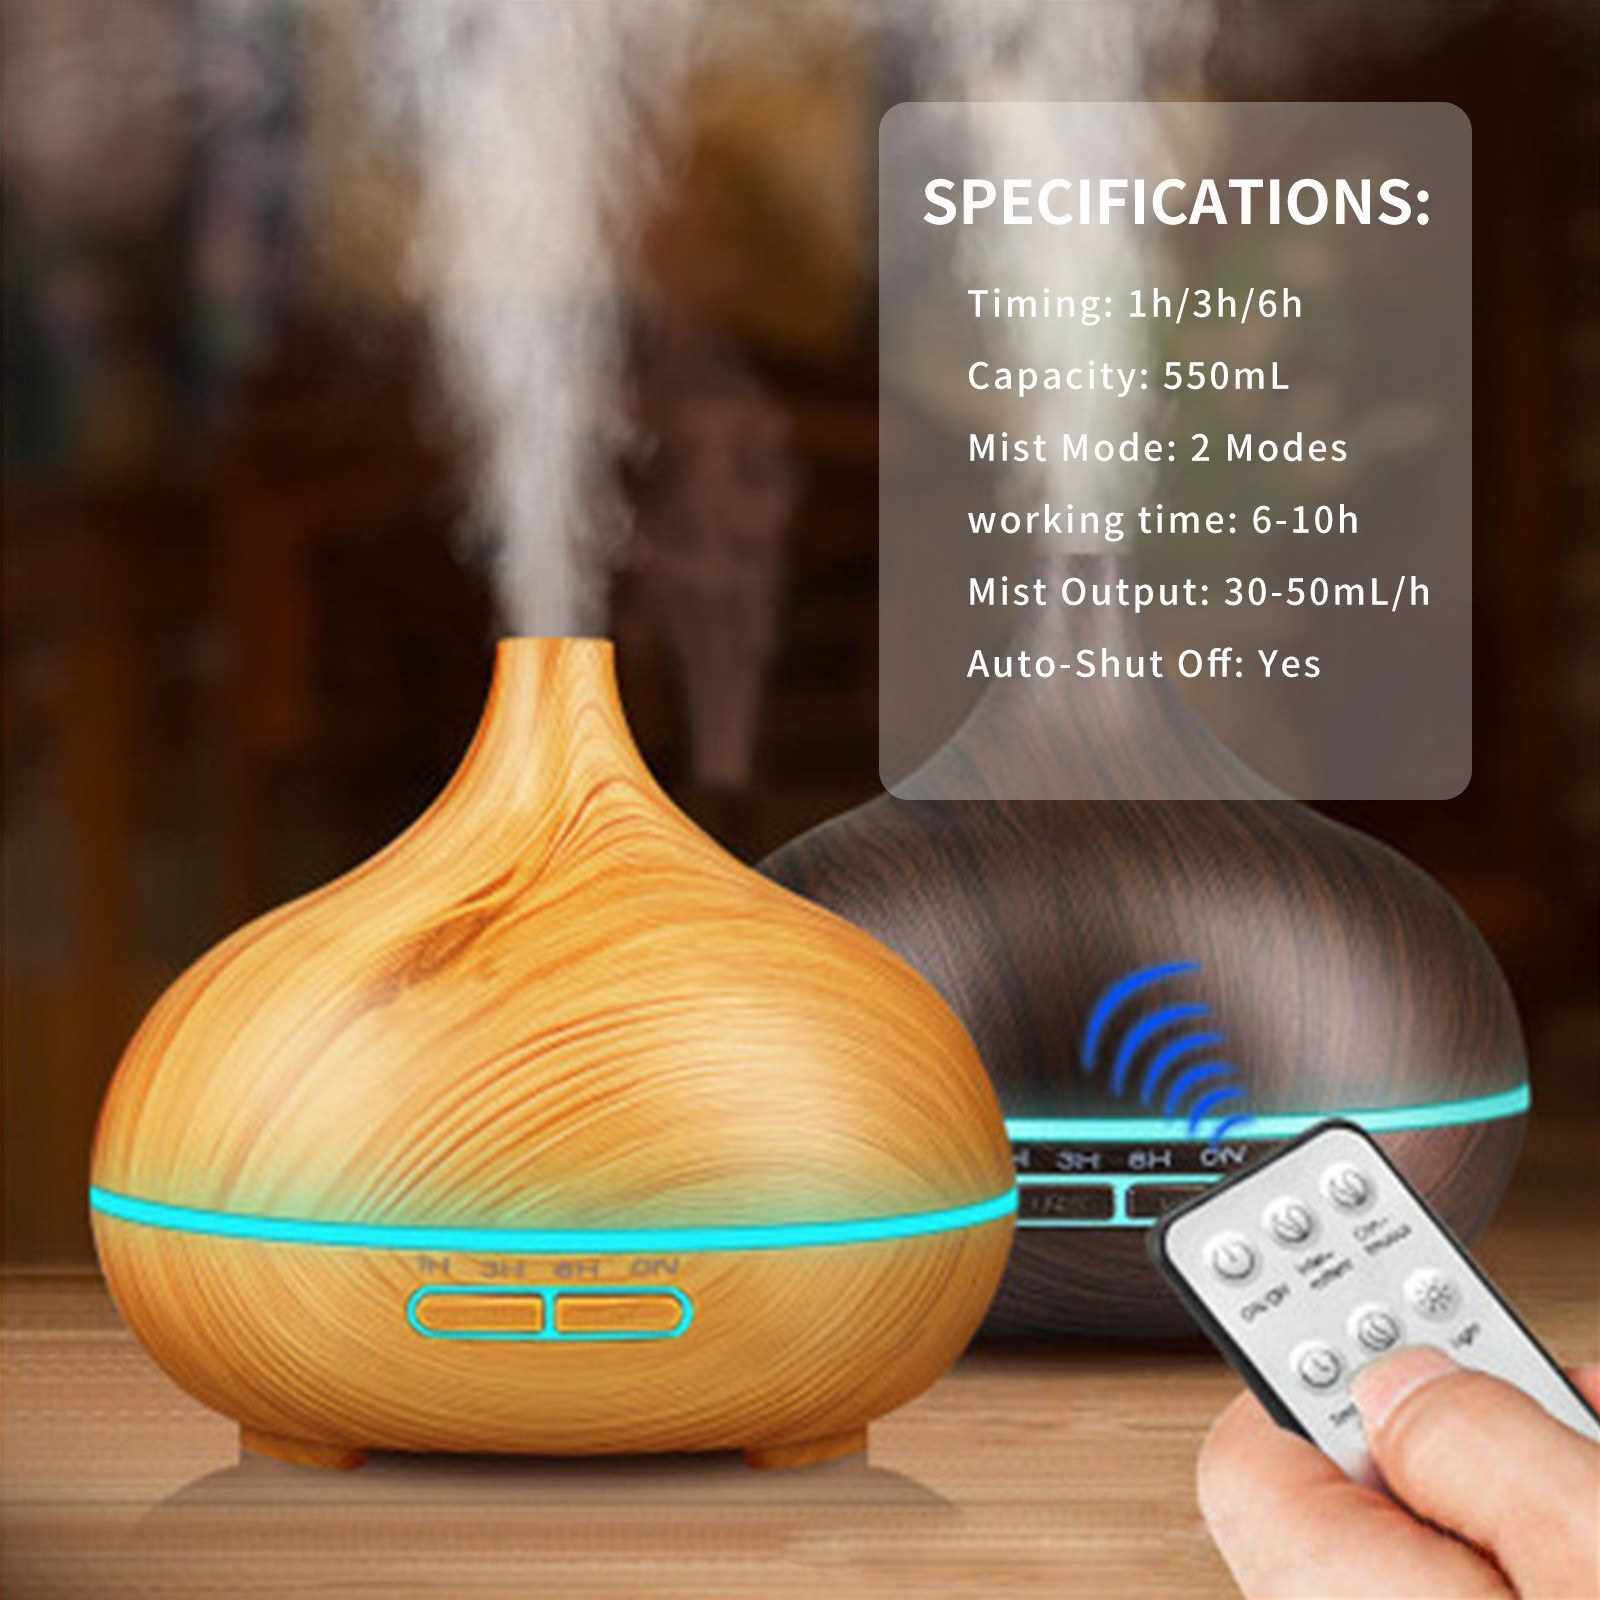 People's Choice 550mL Essential Oil Diffuser Mist Humidifier Diffuser Colorful Night Light Quiet Auto-Shut Off Humidifier with Remote Control Cool Desktop Humidifier for Home Office Bedroom (Khaki)